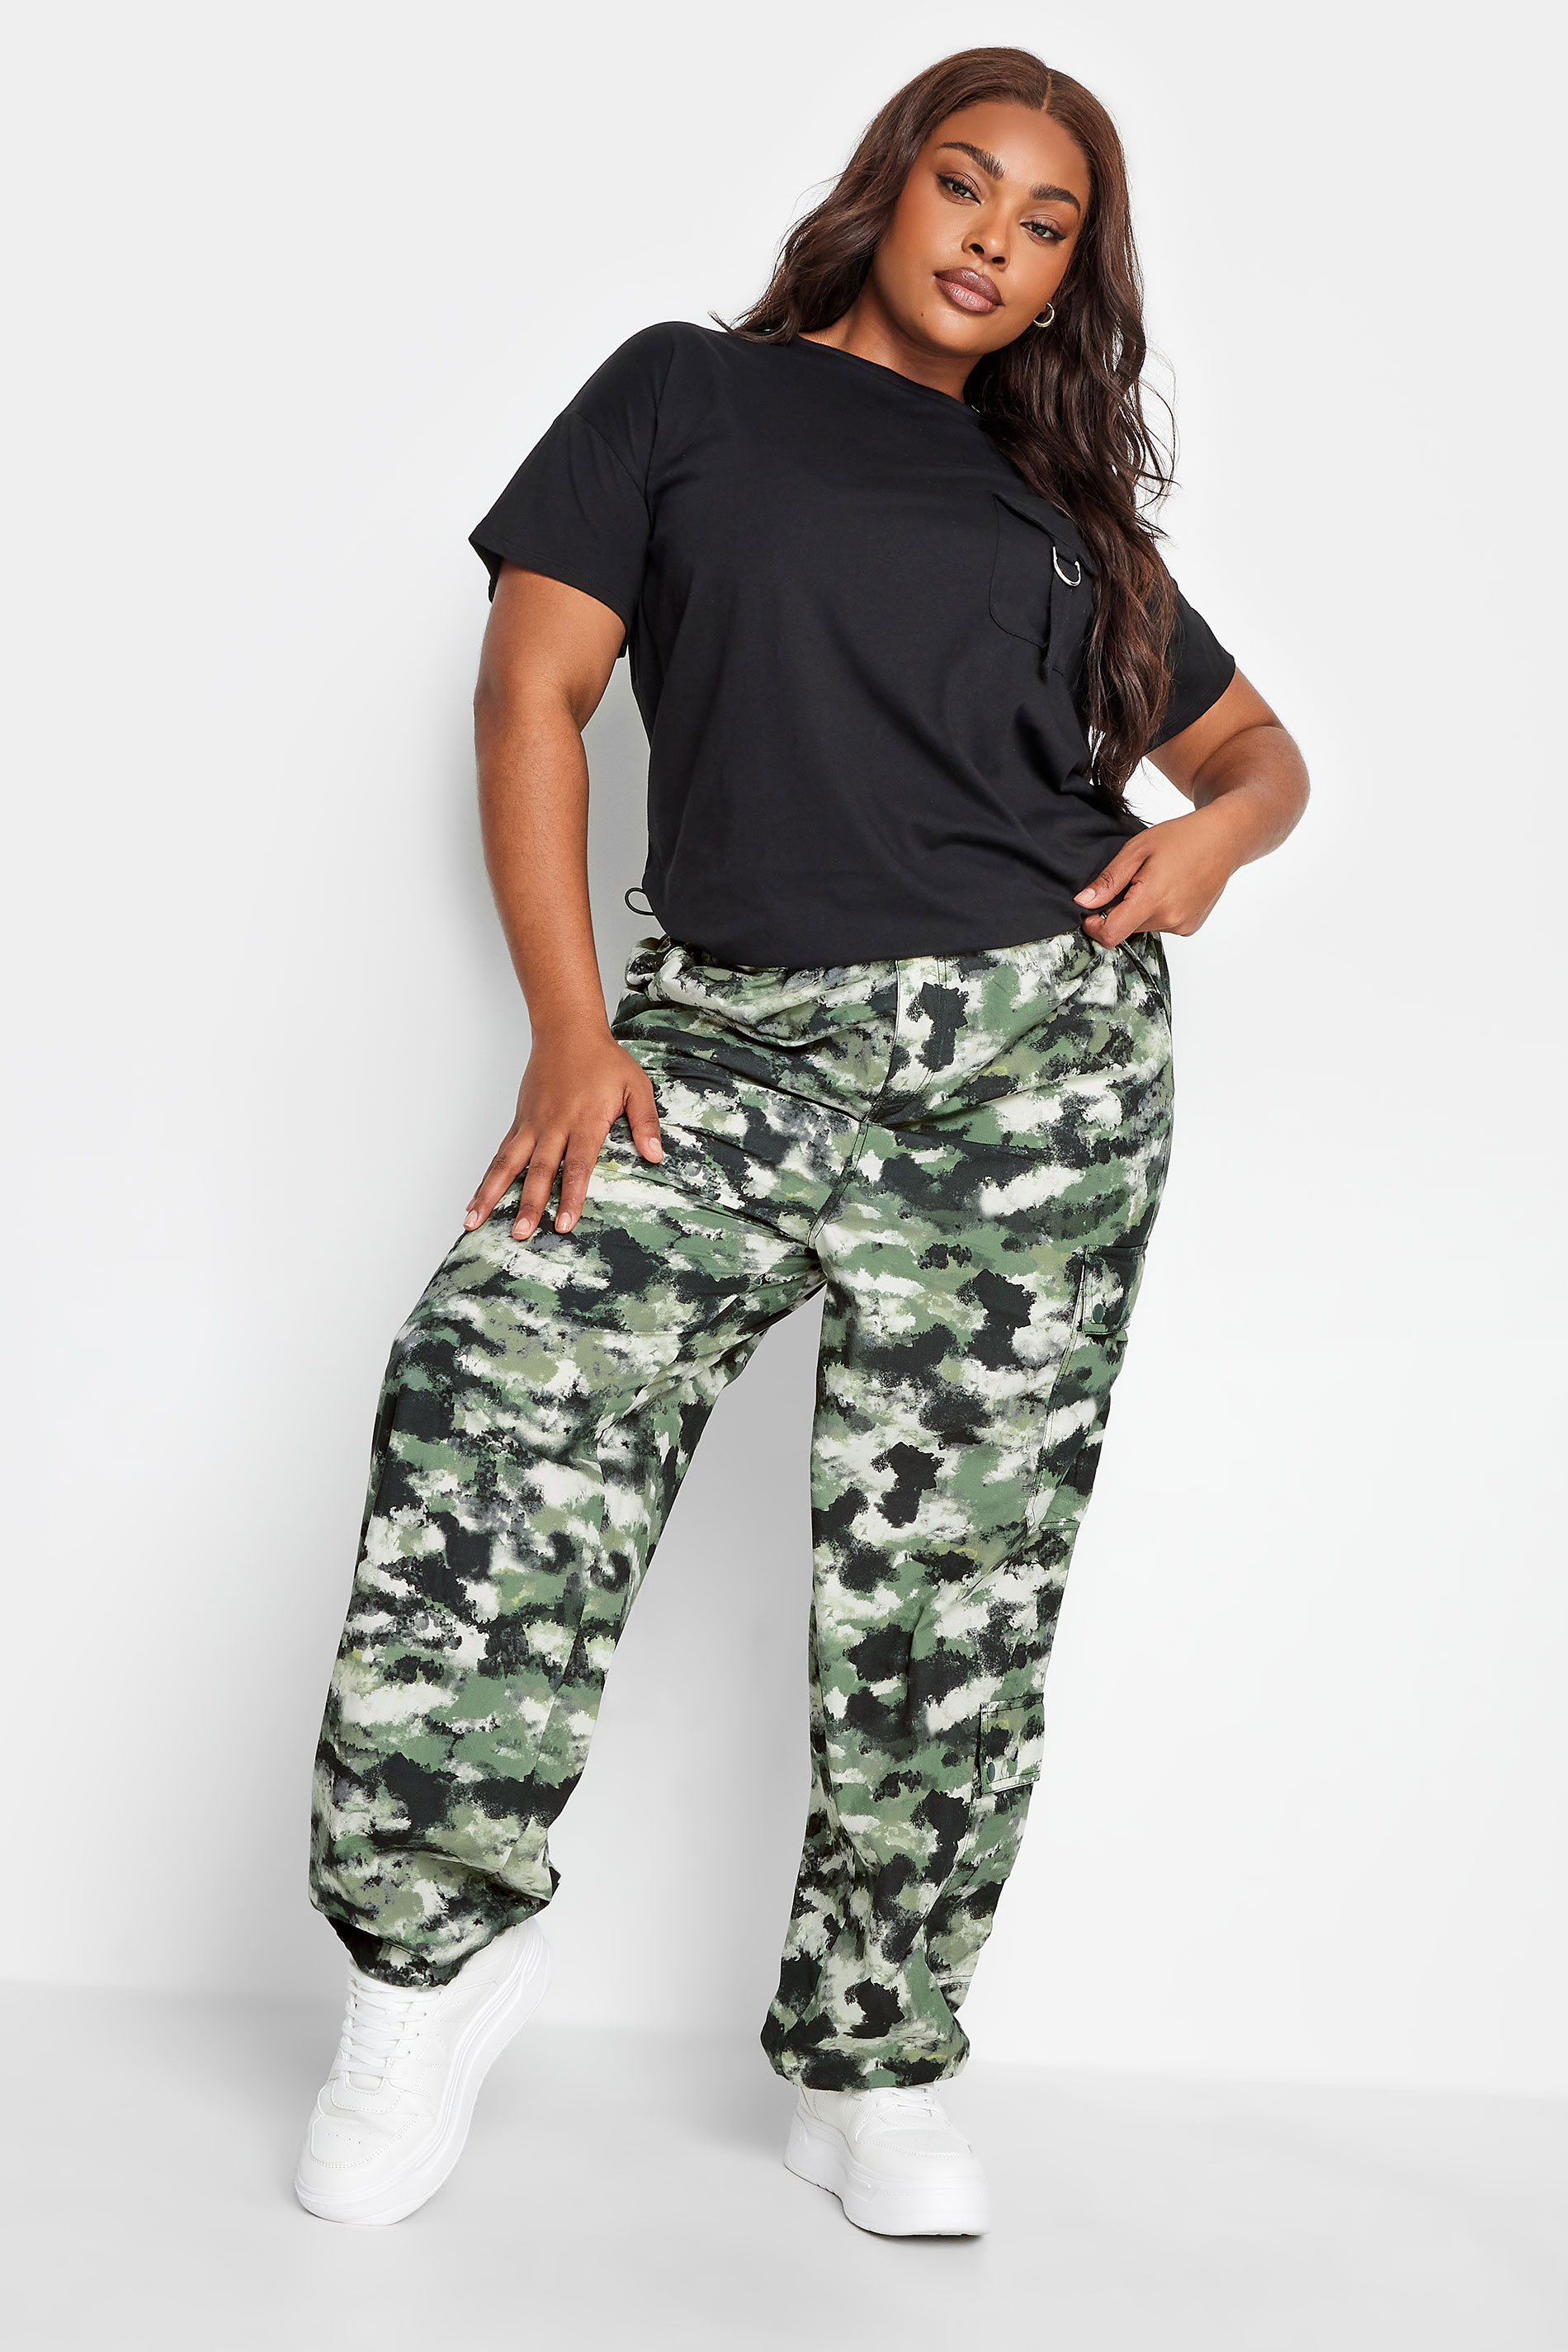 Army Print Trousers for women trousers & pants